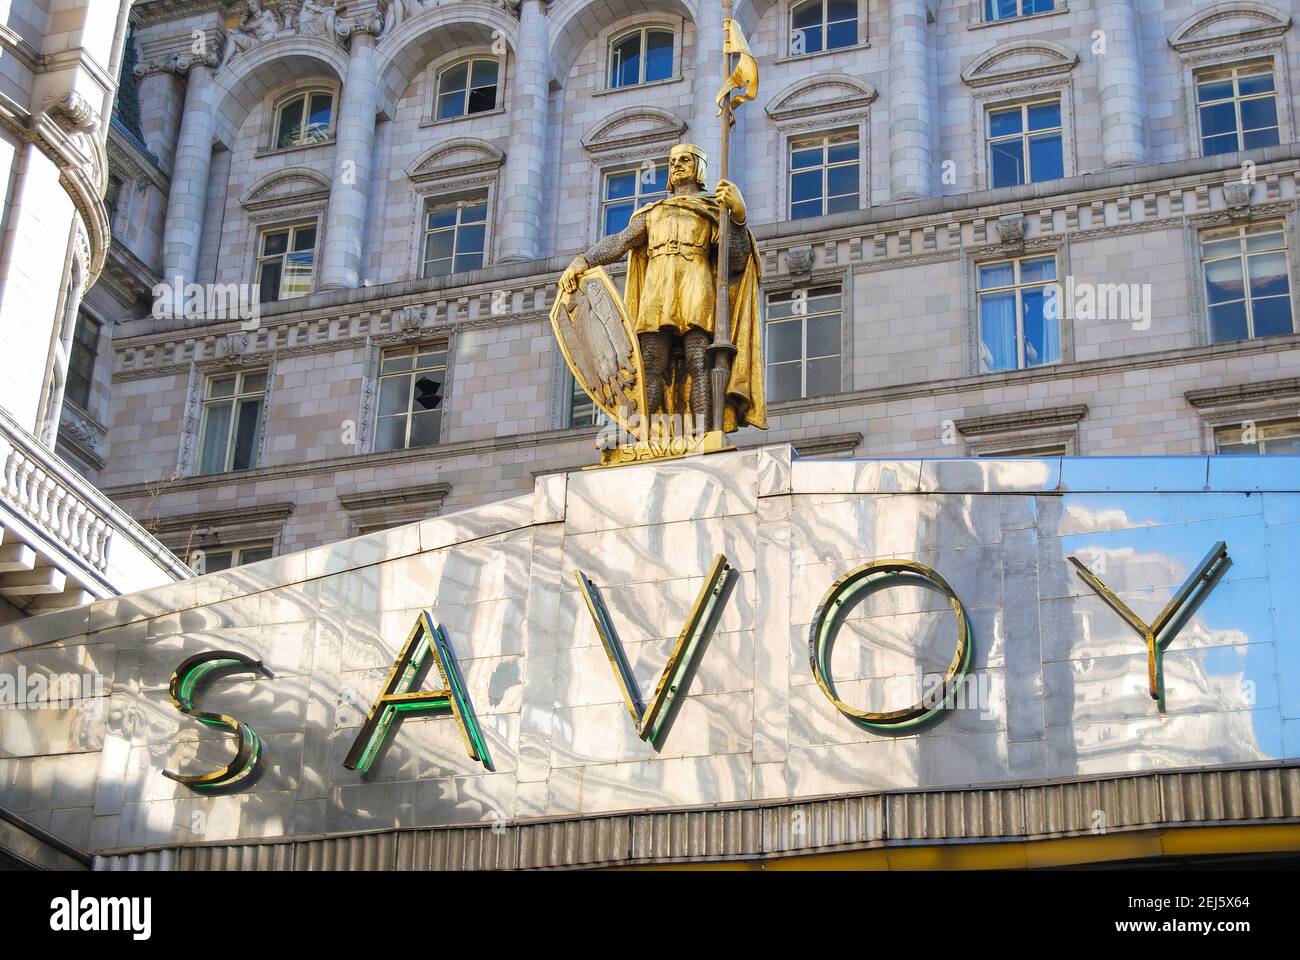 Cartello d'ingresso Savoy Hotel, The Strand, City of Westminster, Greater London, England, Regno Unito Foto Stock